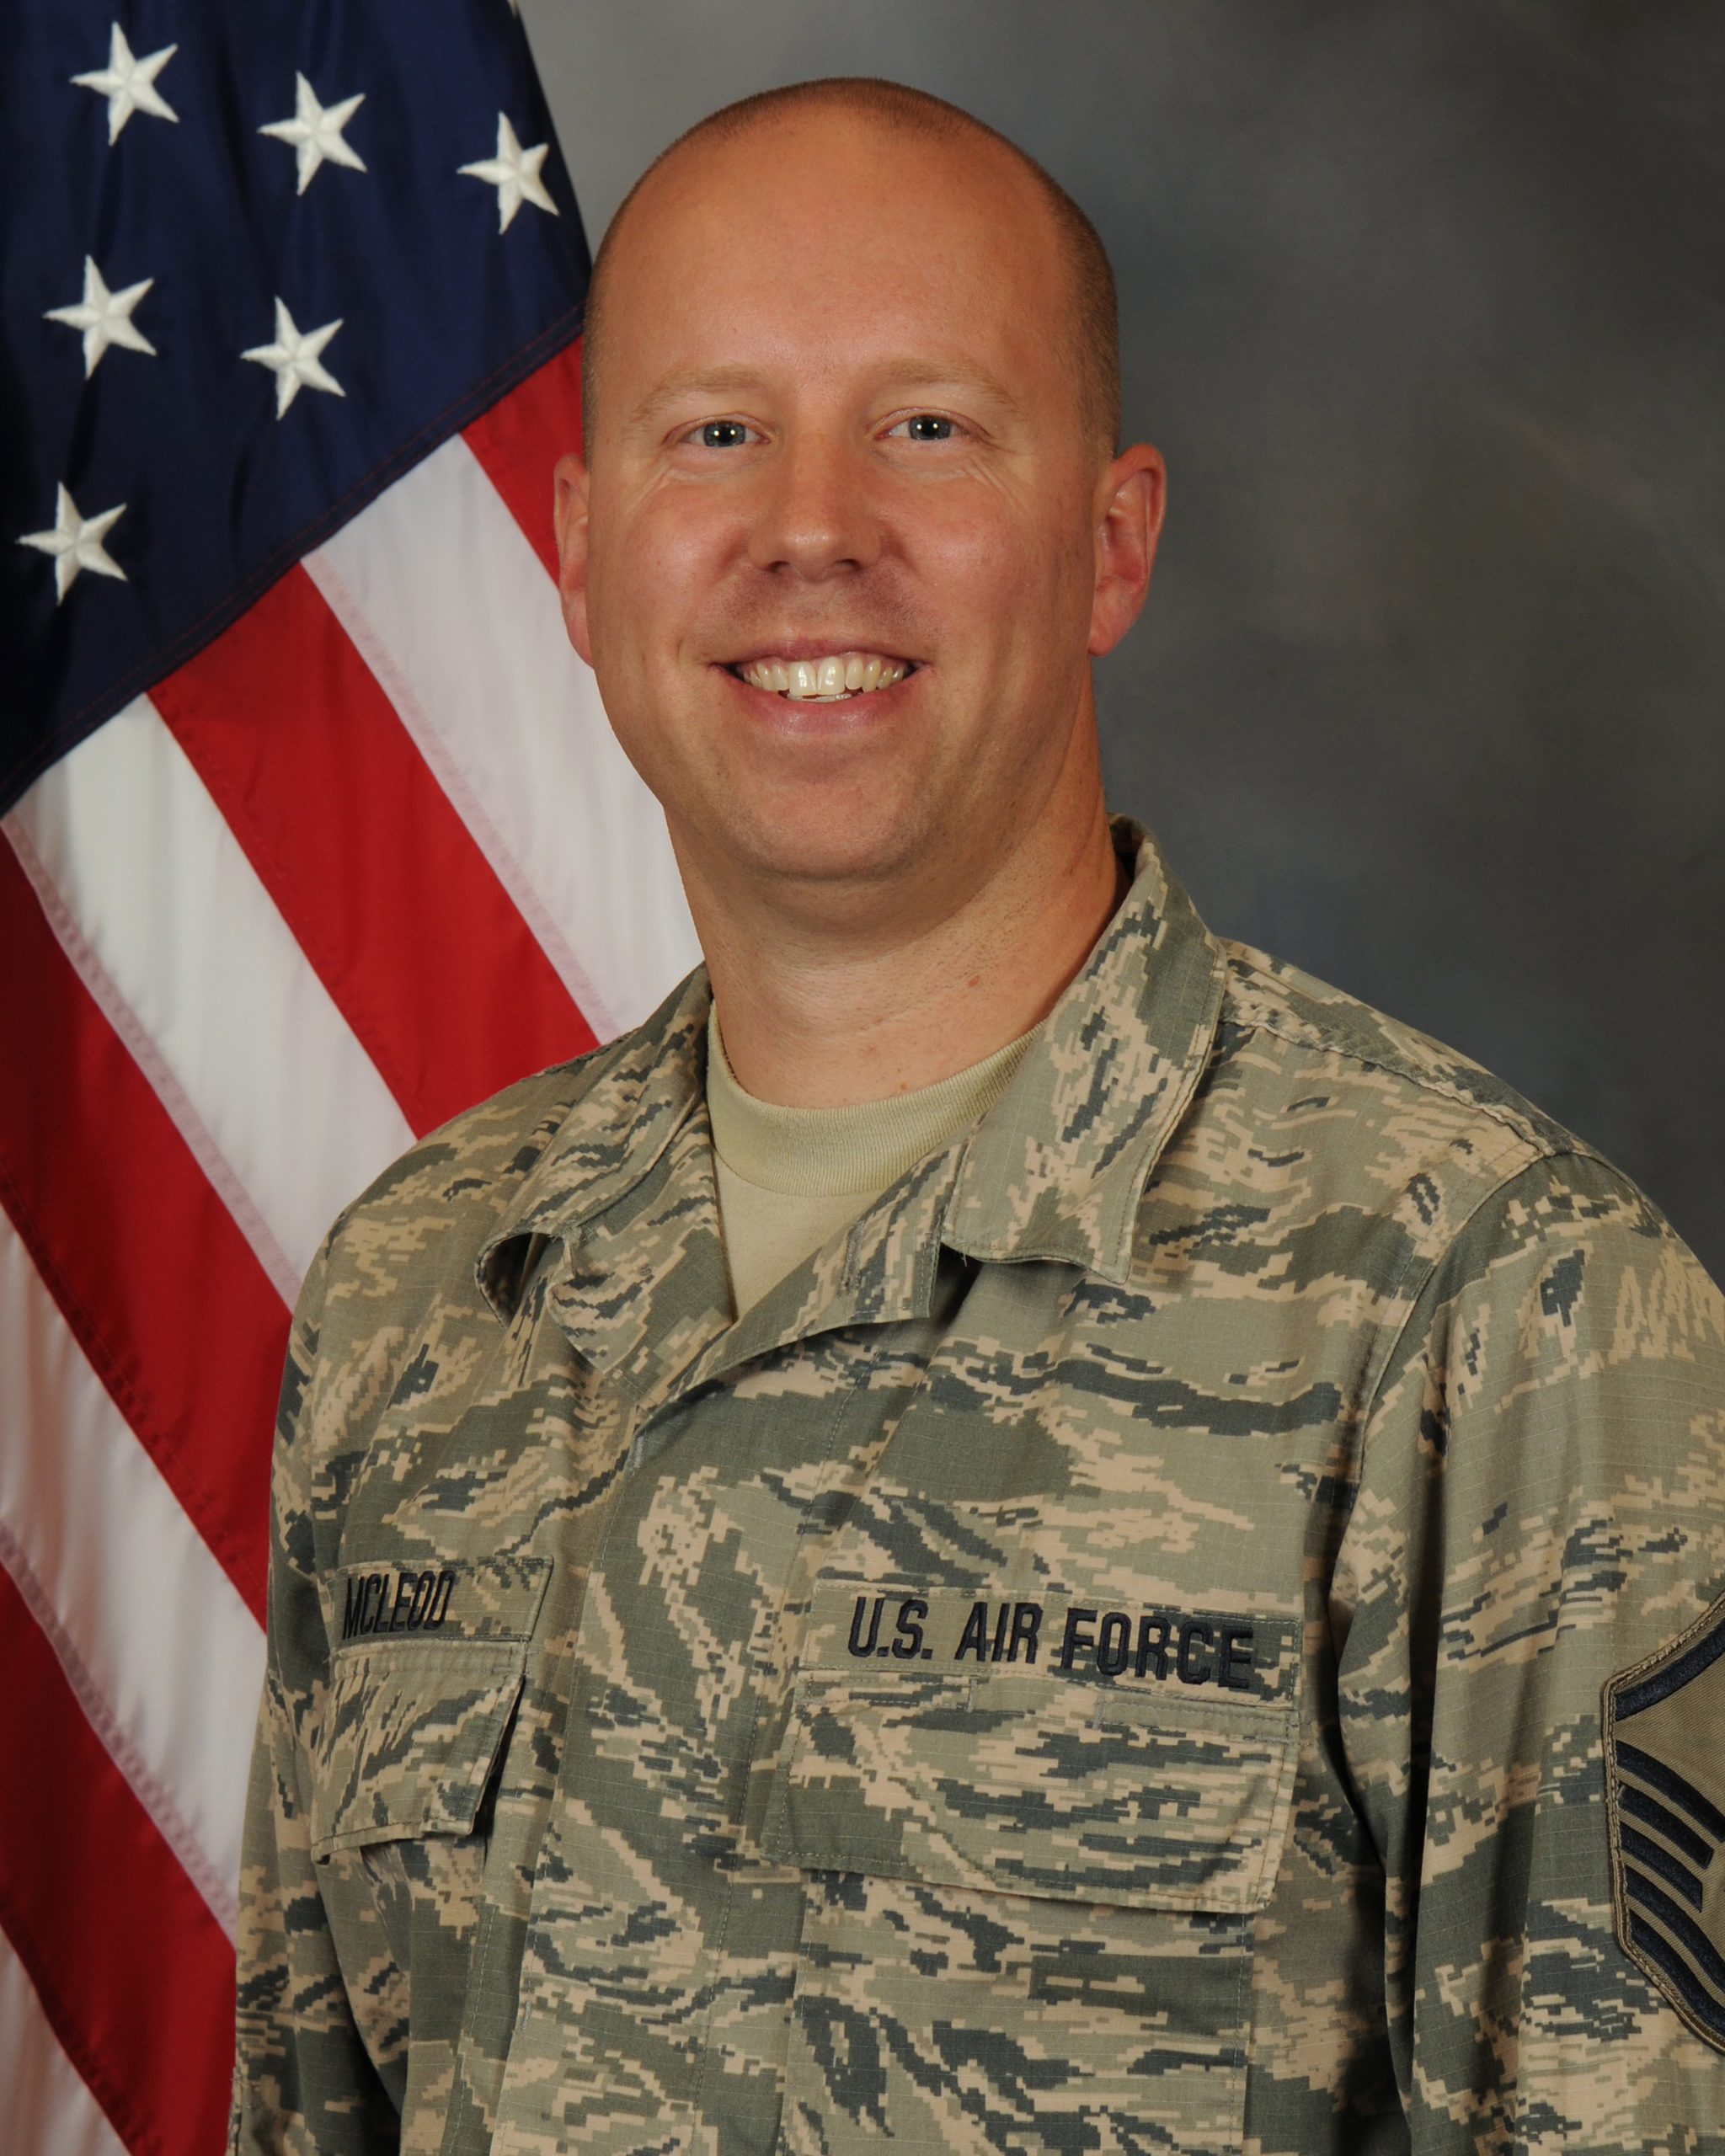 Senior Master Sgt. Christopher McLeod is a victim advocate at the 148th Fighter Wing in Duluth, Minnesota.